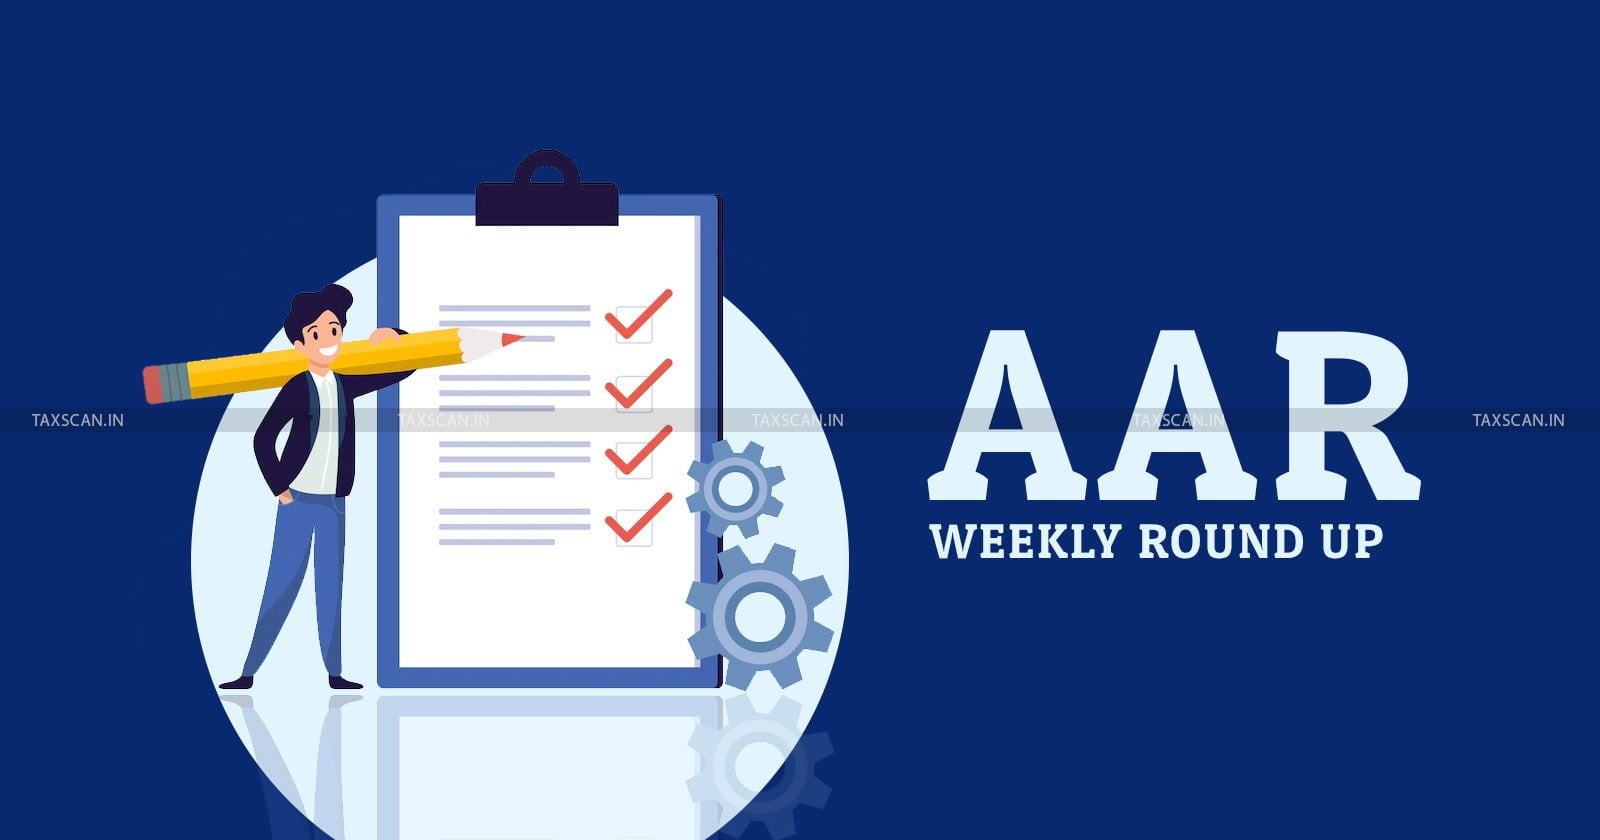 AAR Weekly Round-Up - Weekly Round-Up - AAR - Authority for Advance Ruling - AAAR - Appellate Authority for Advance Ruling - taxscan